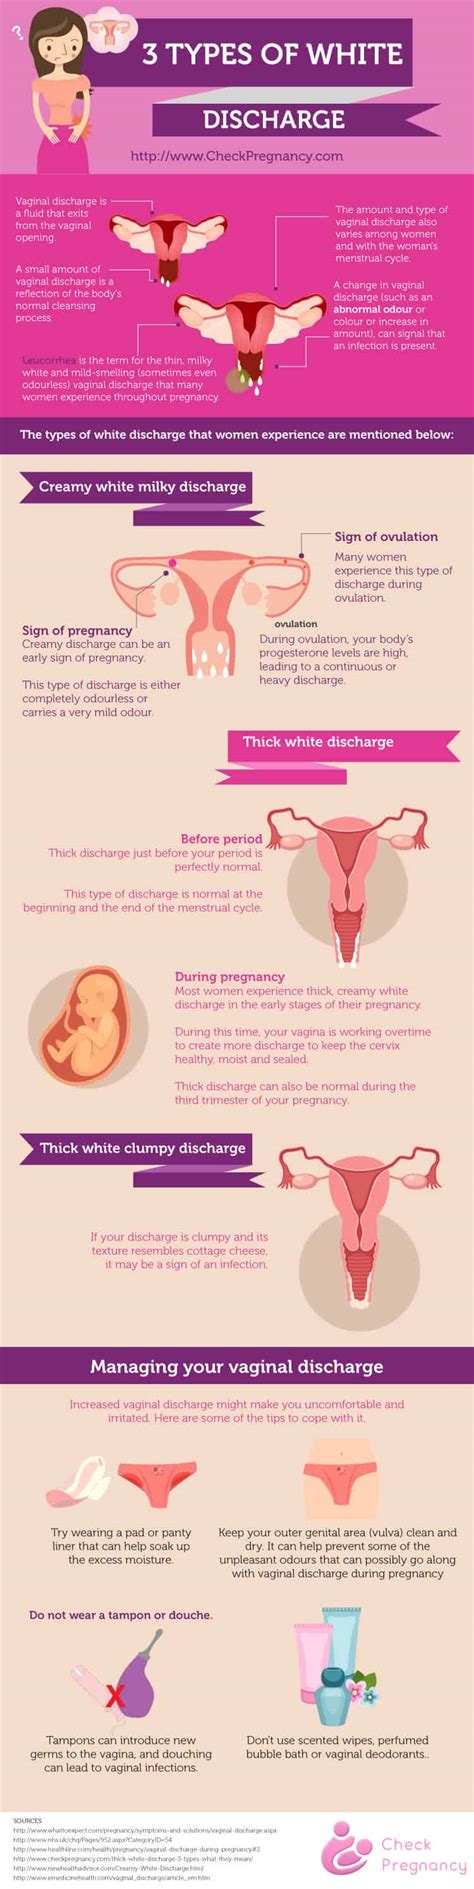 Shades Of White 3 Types Of Vaginal Discharge Infographic